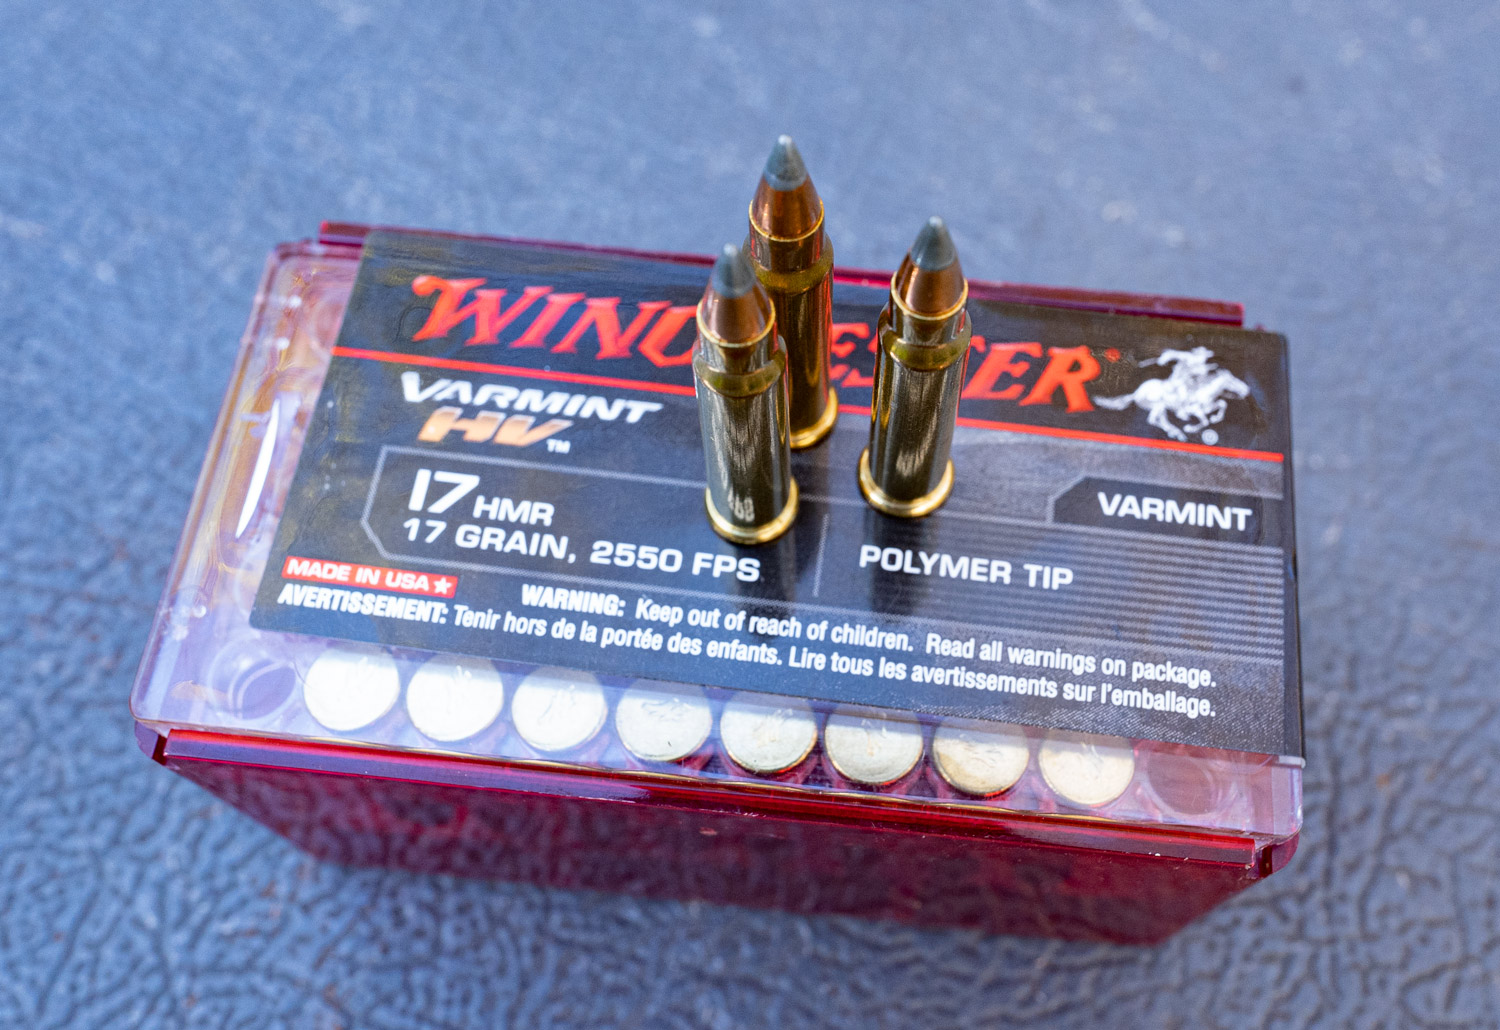 Is a .17 HMR Good for Coyote Hunting? Find Out Now!